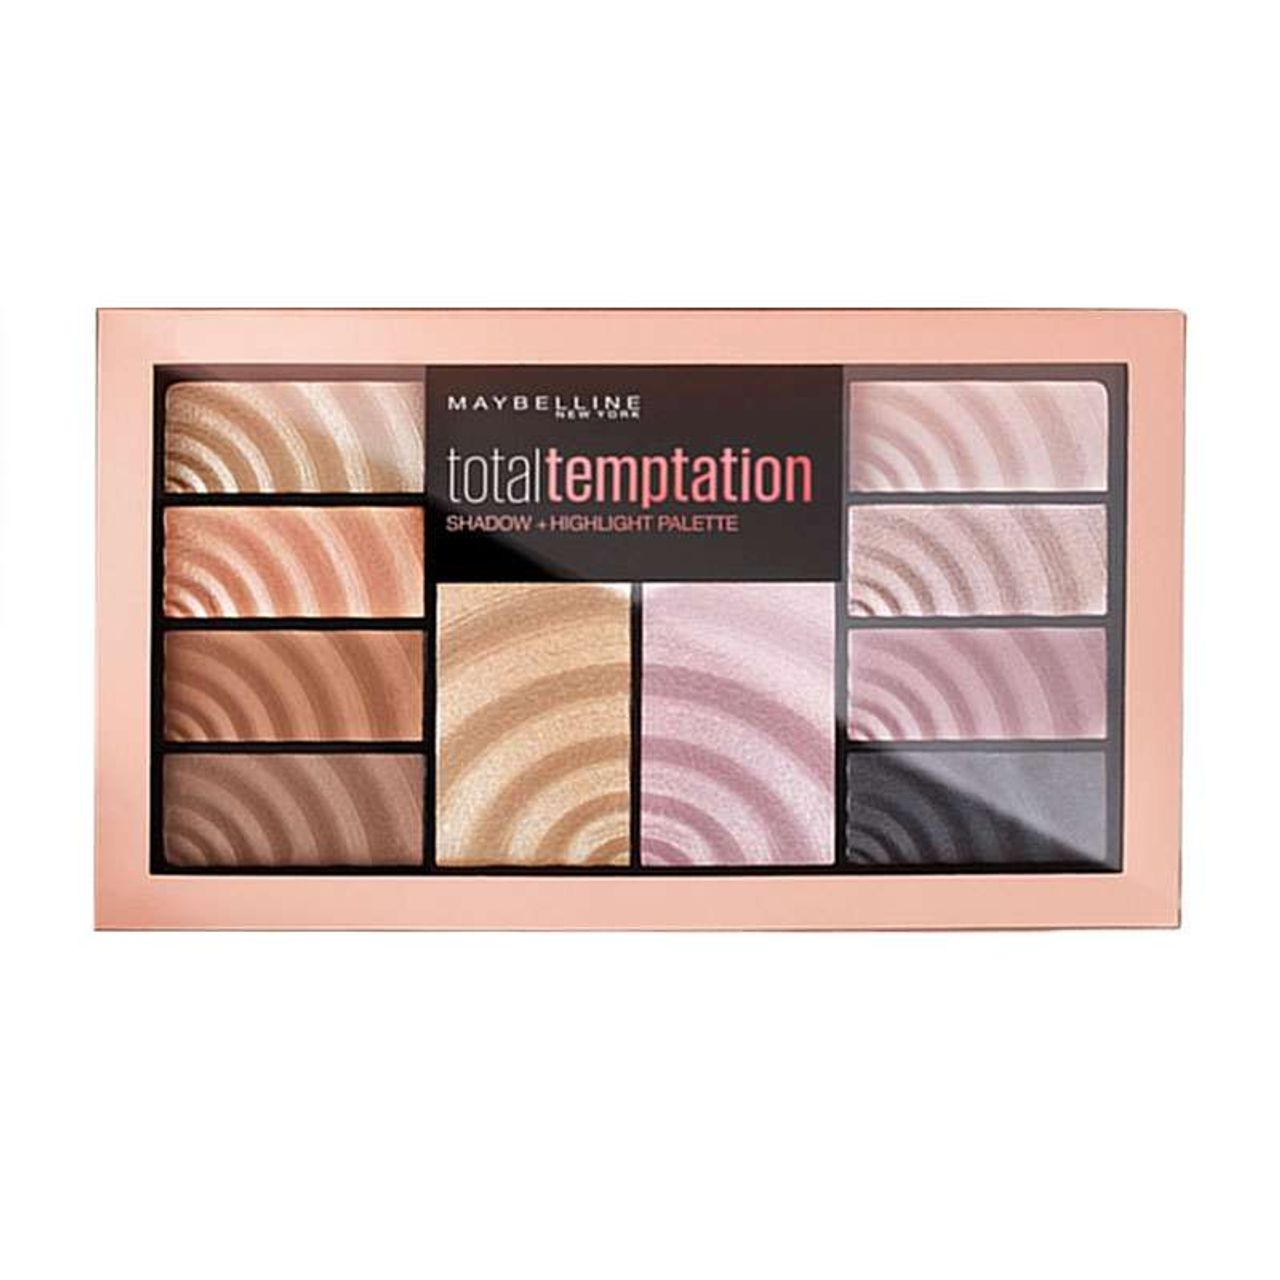 Maybelline Total Temptation - Shadow + Highlight Pallette